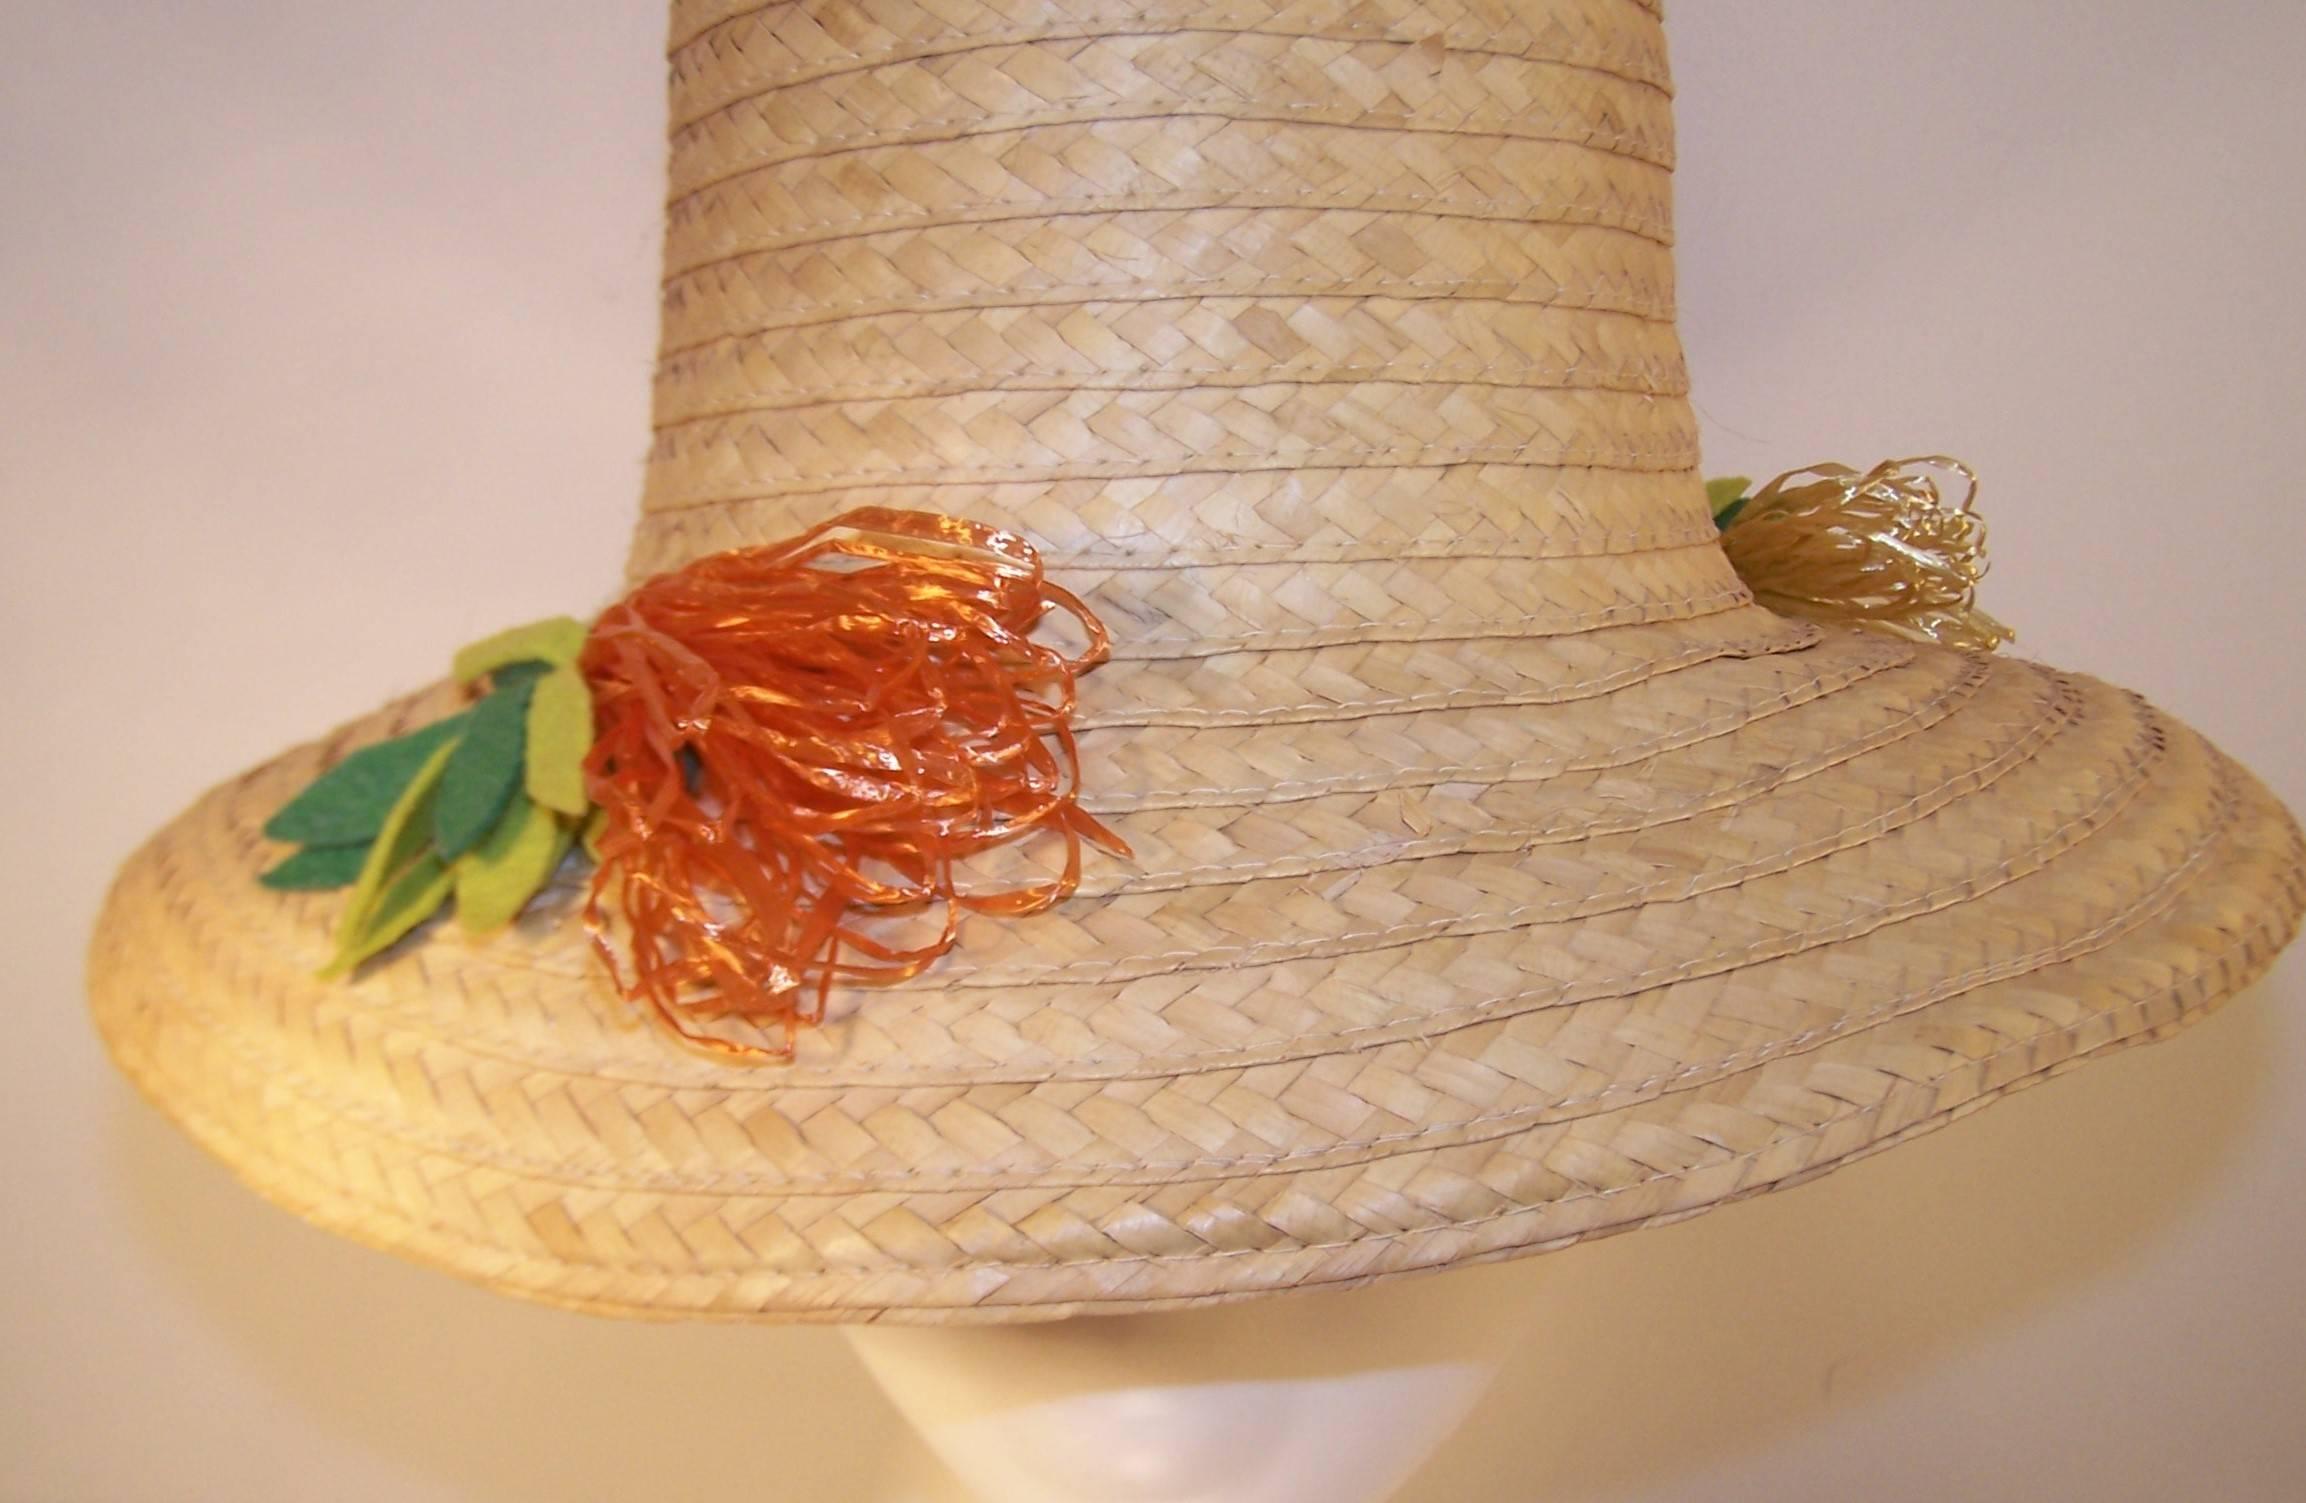 Women's Whimsical 1950's Conical Novelty Straw Beach Hat